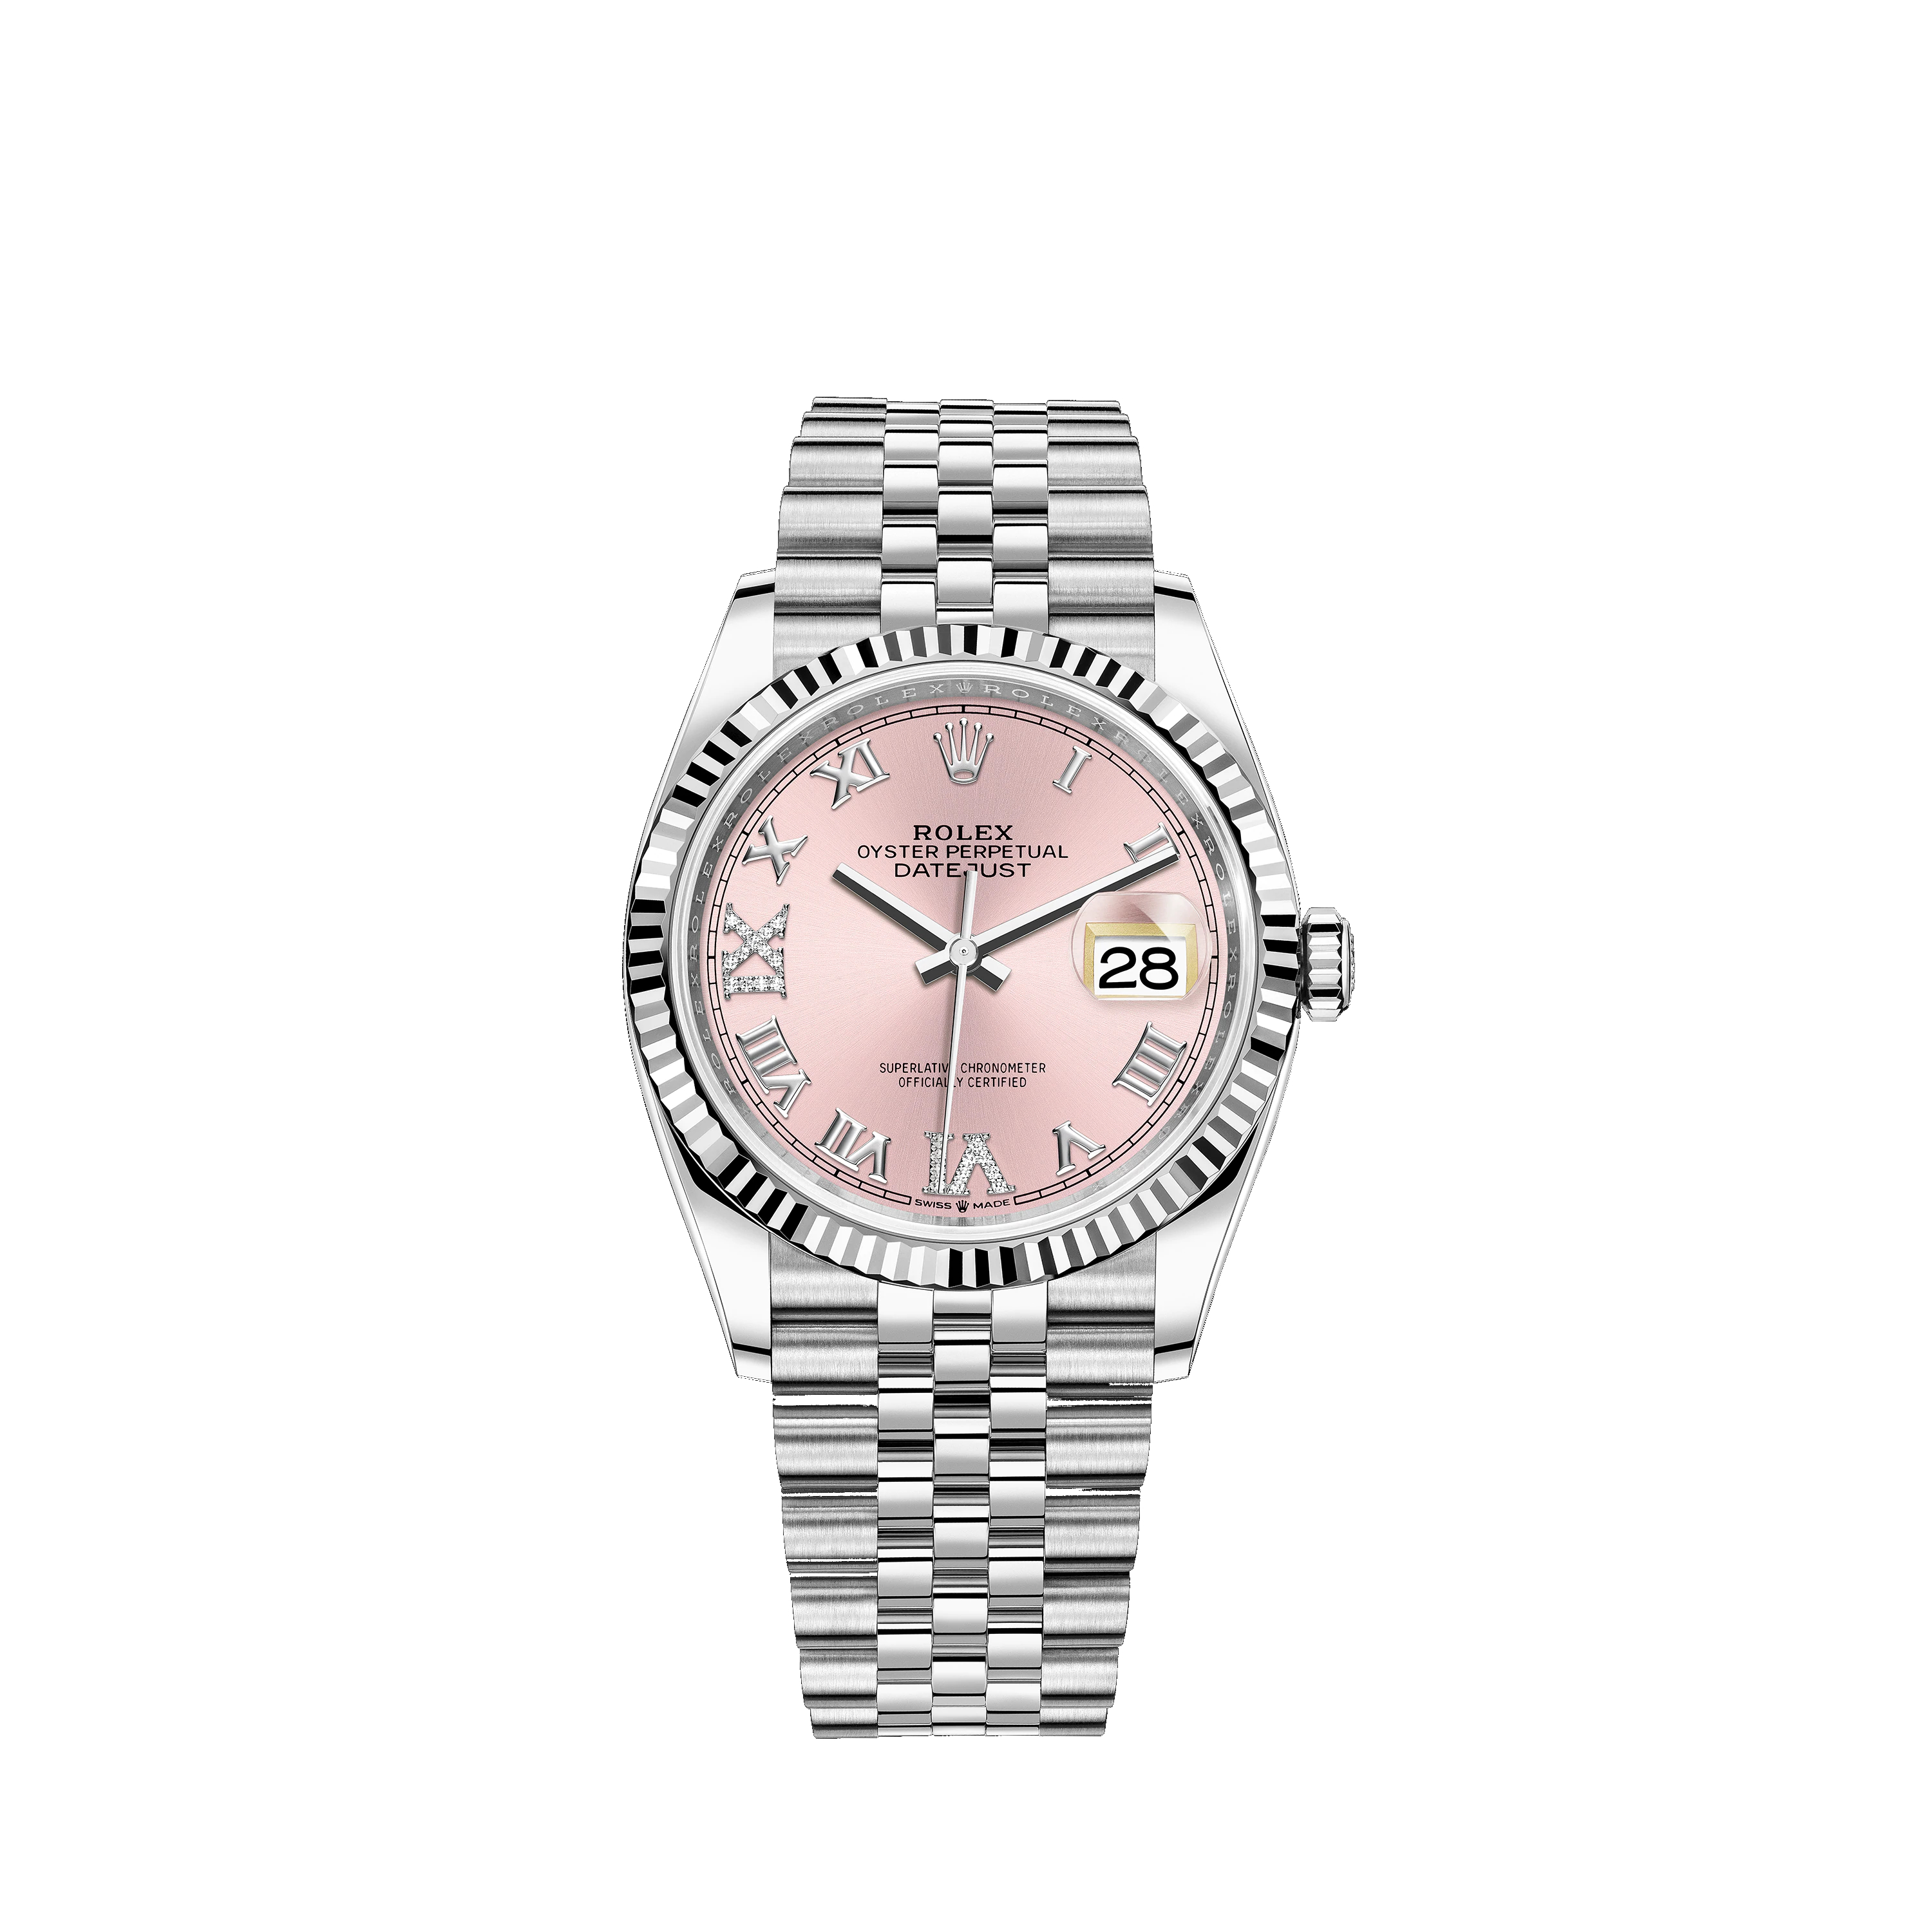 Datejust 36 126234 White Gold & Stainless Steel Watch (Pink Set with Diamonds)